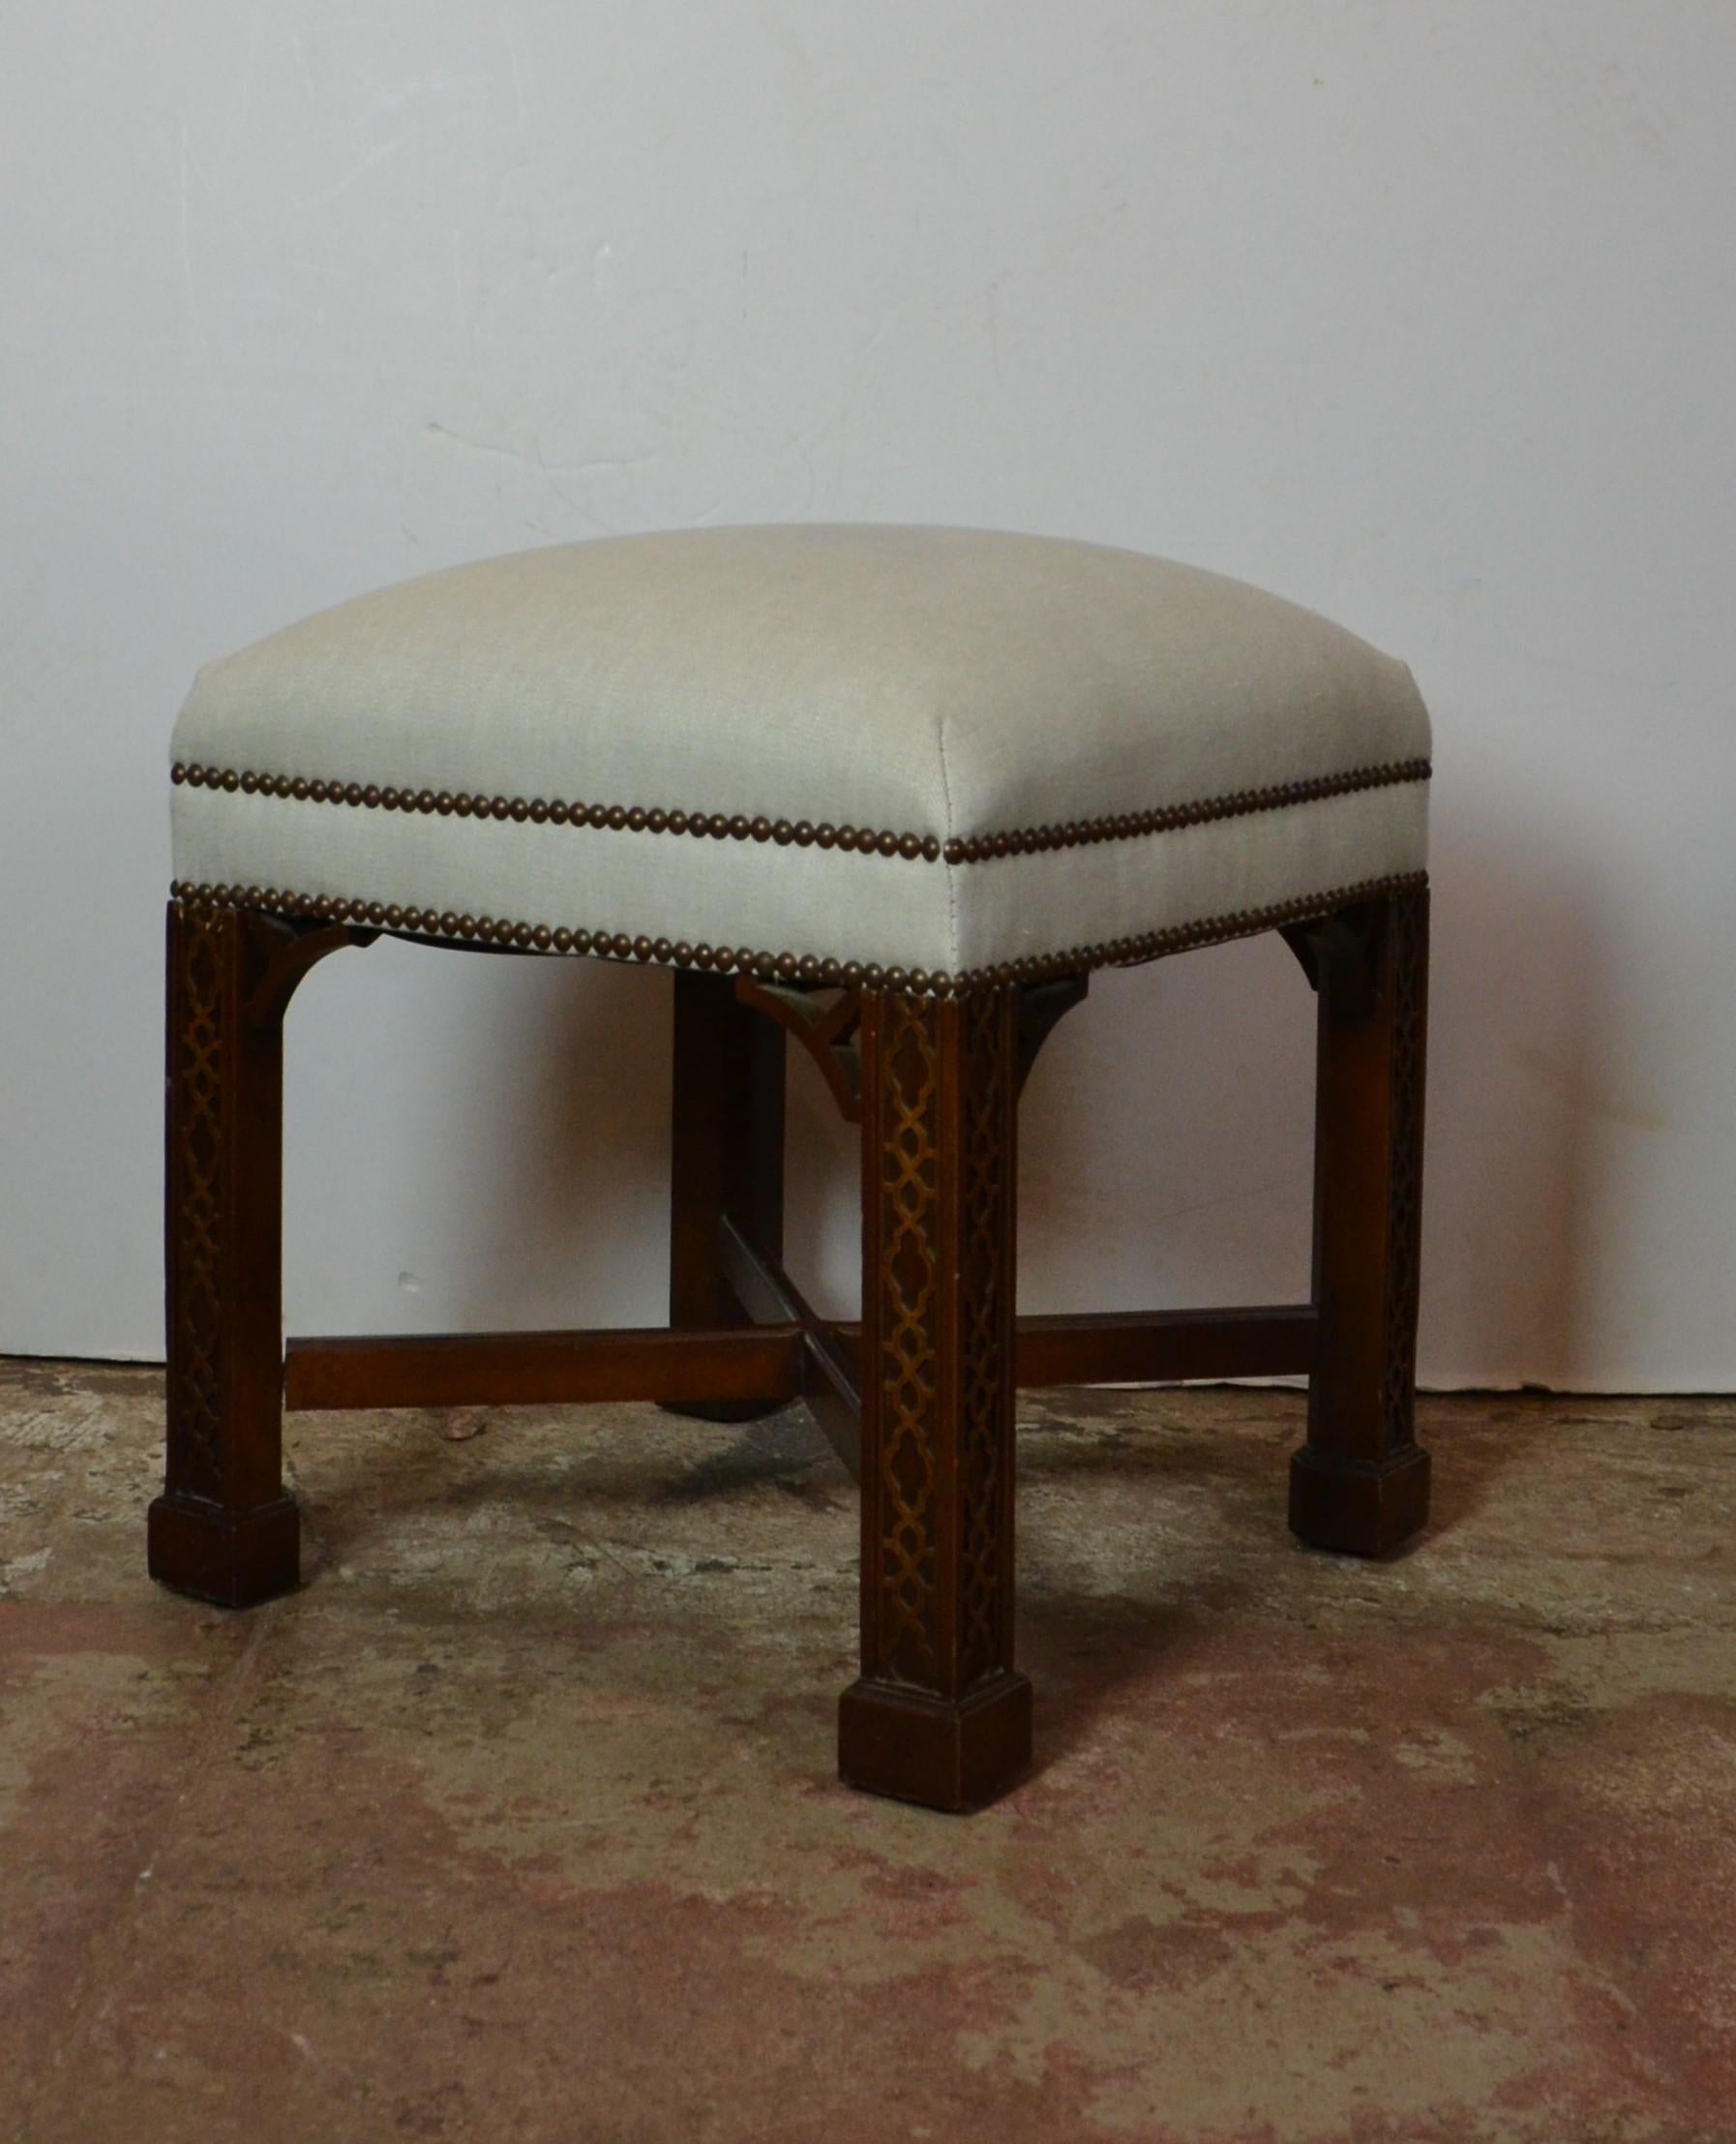 Pair of Chippendale style bench. The frames are mahogany wood and upholstered in linen.